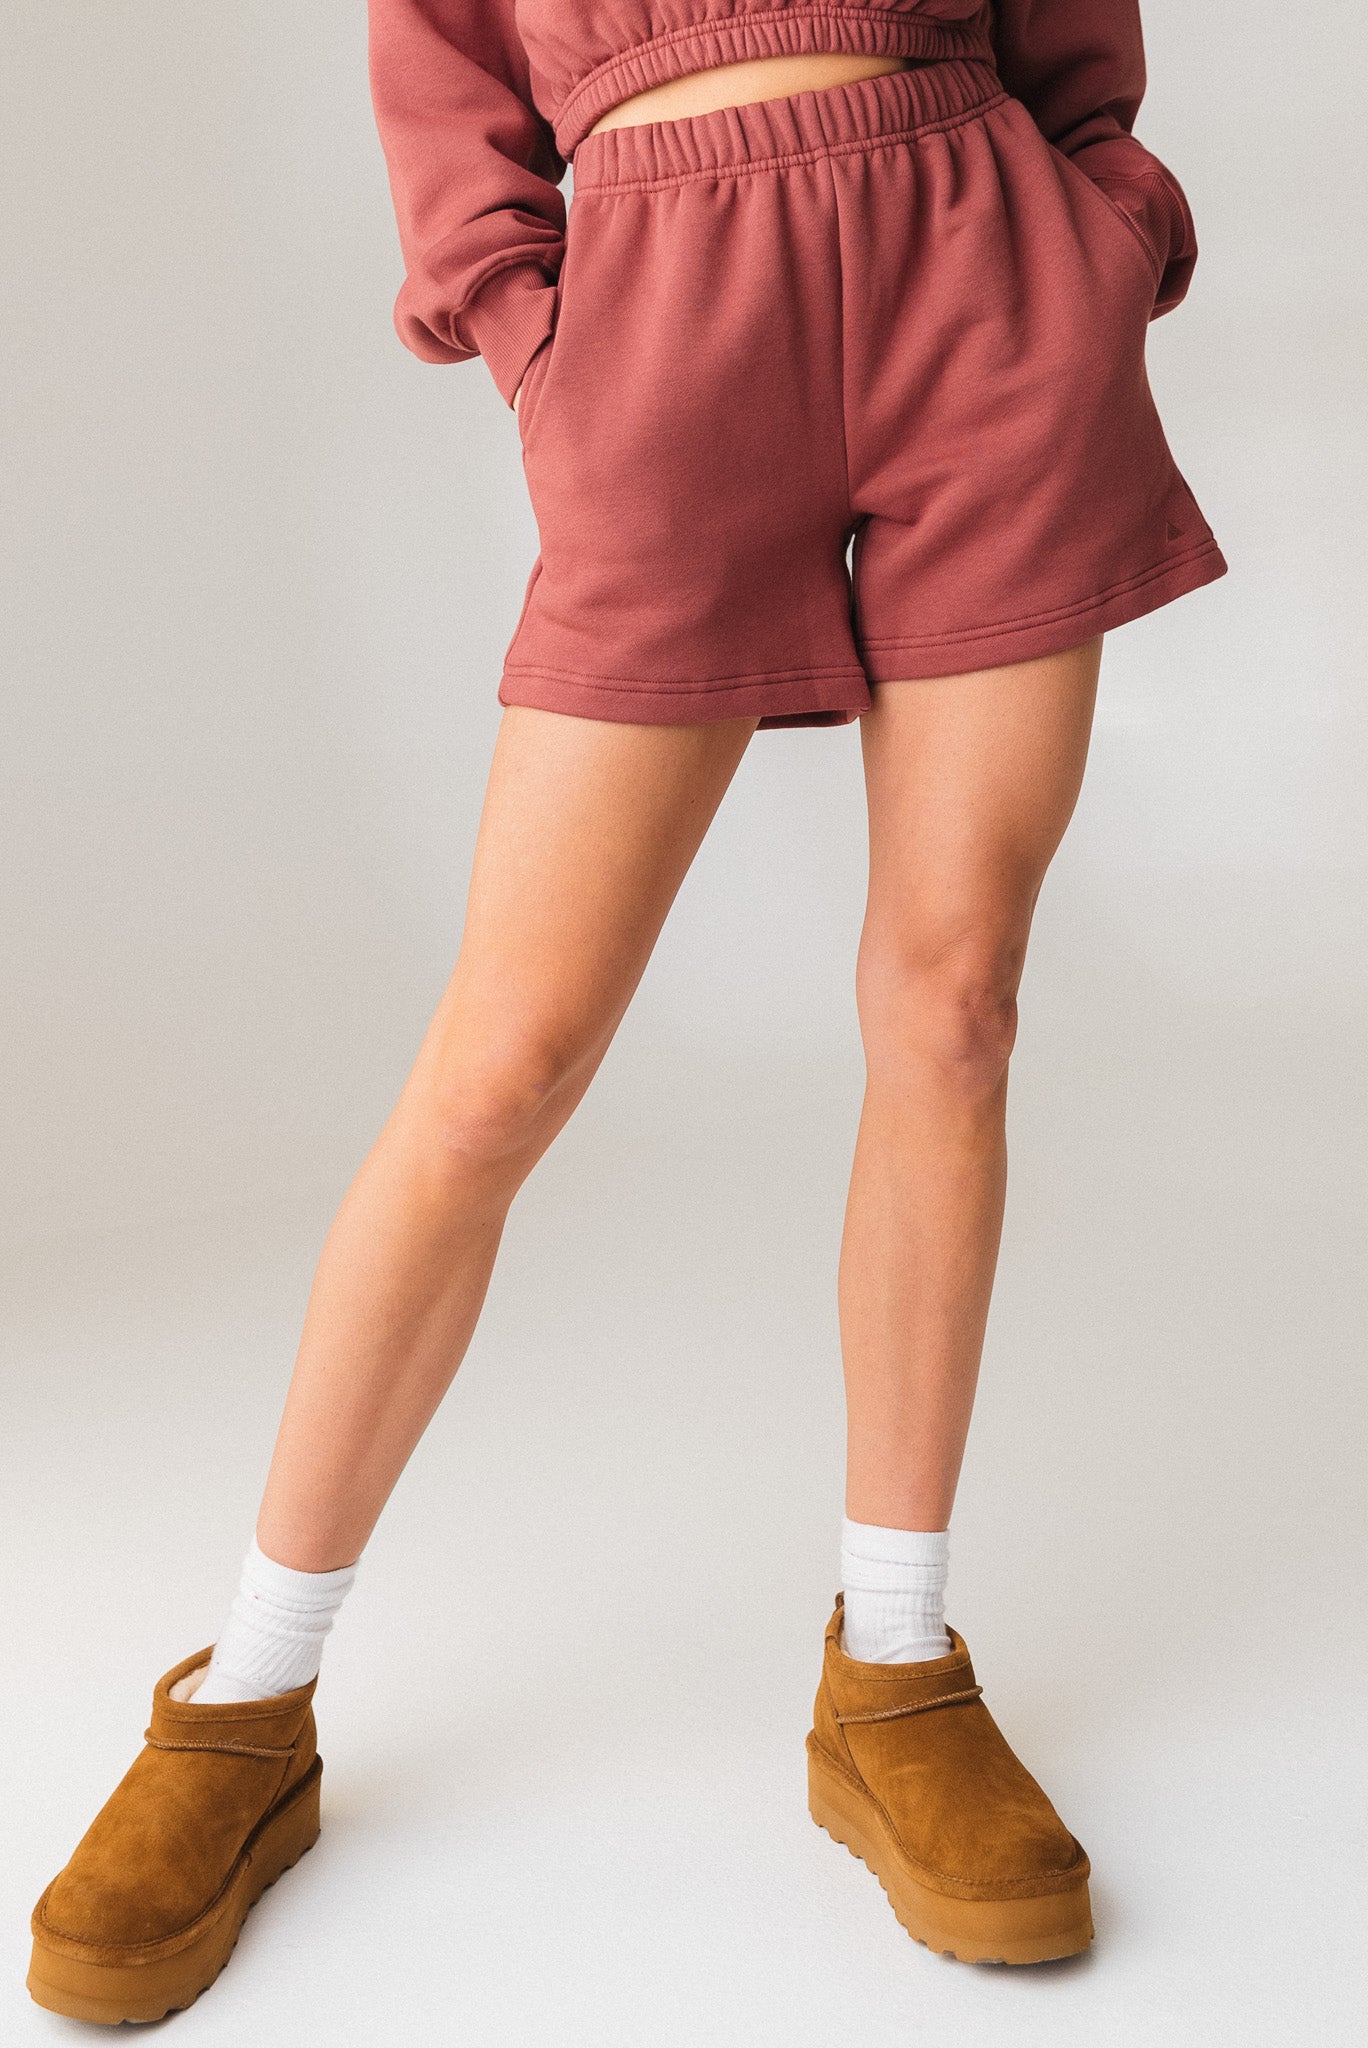 A woman wearing the Vitality Uni Cozy Short in Rosewood